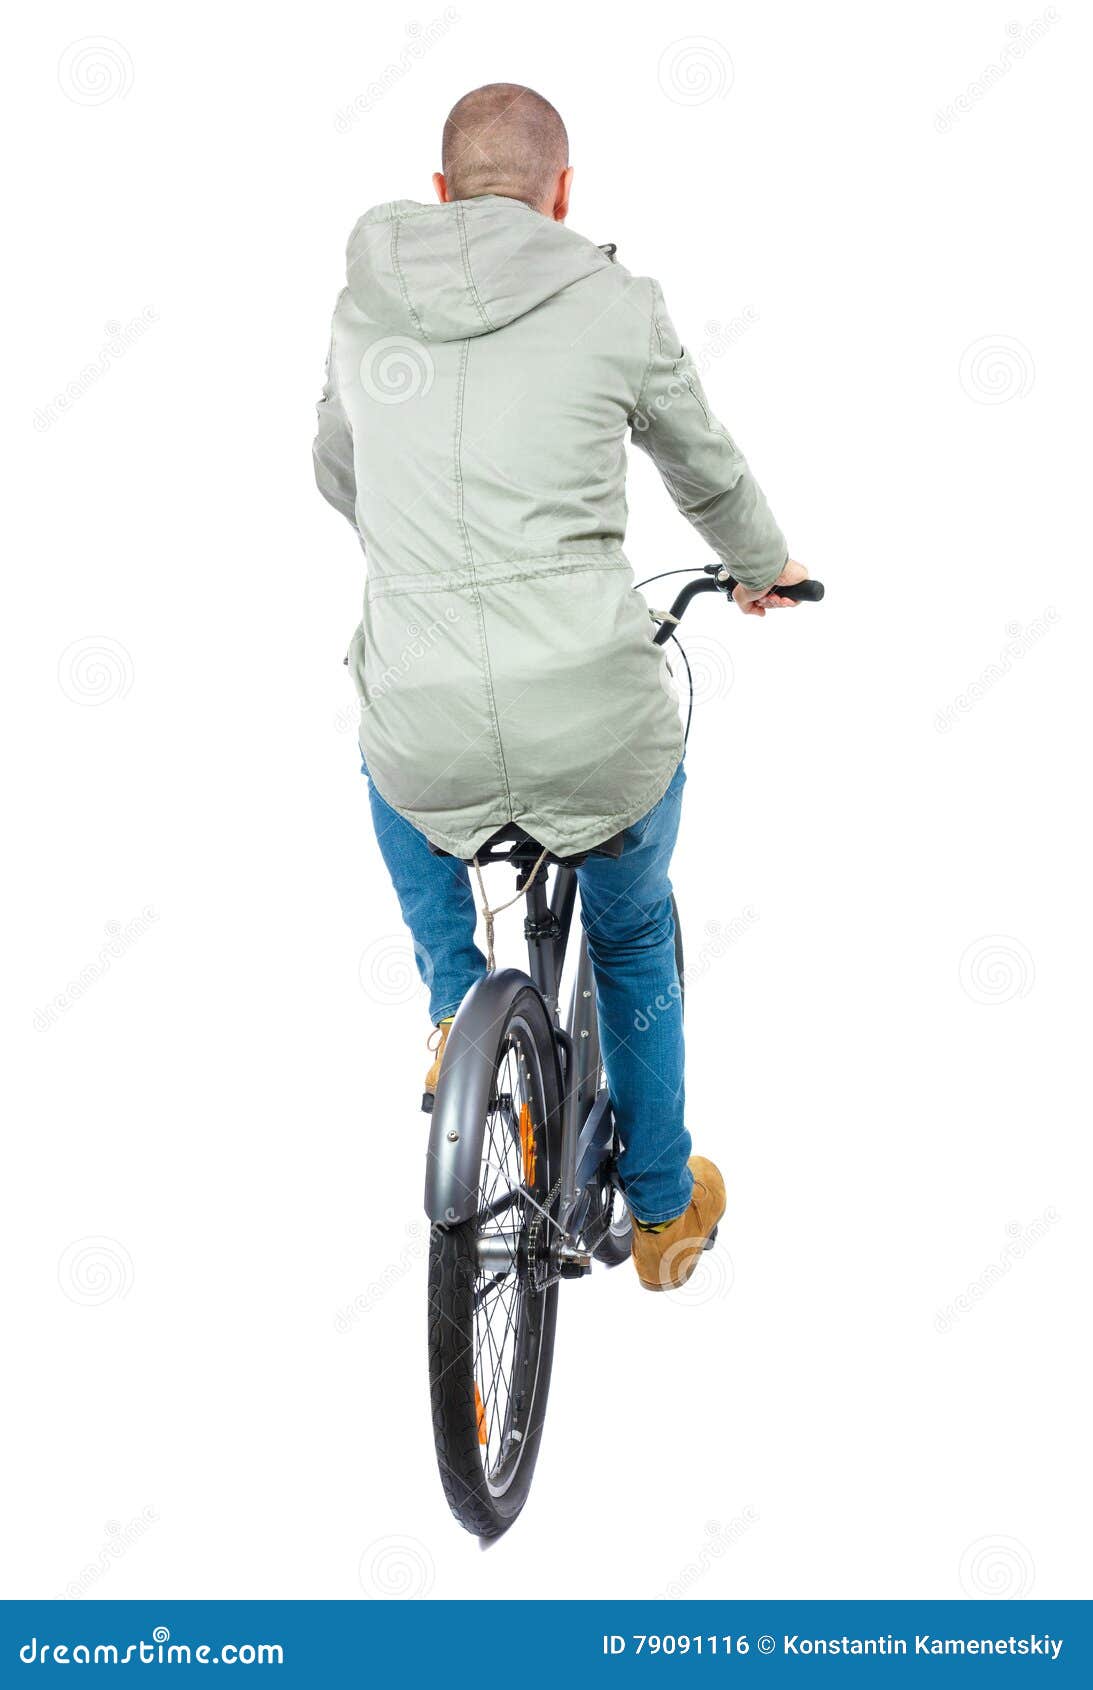 Back View of a Man with a Bicycle. Stock Photo - Back View Man Bicycle Cyclist RiDes Rear People Collection BacksiDe Person IsolateD Over White 79091116